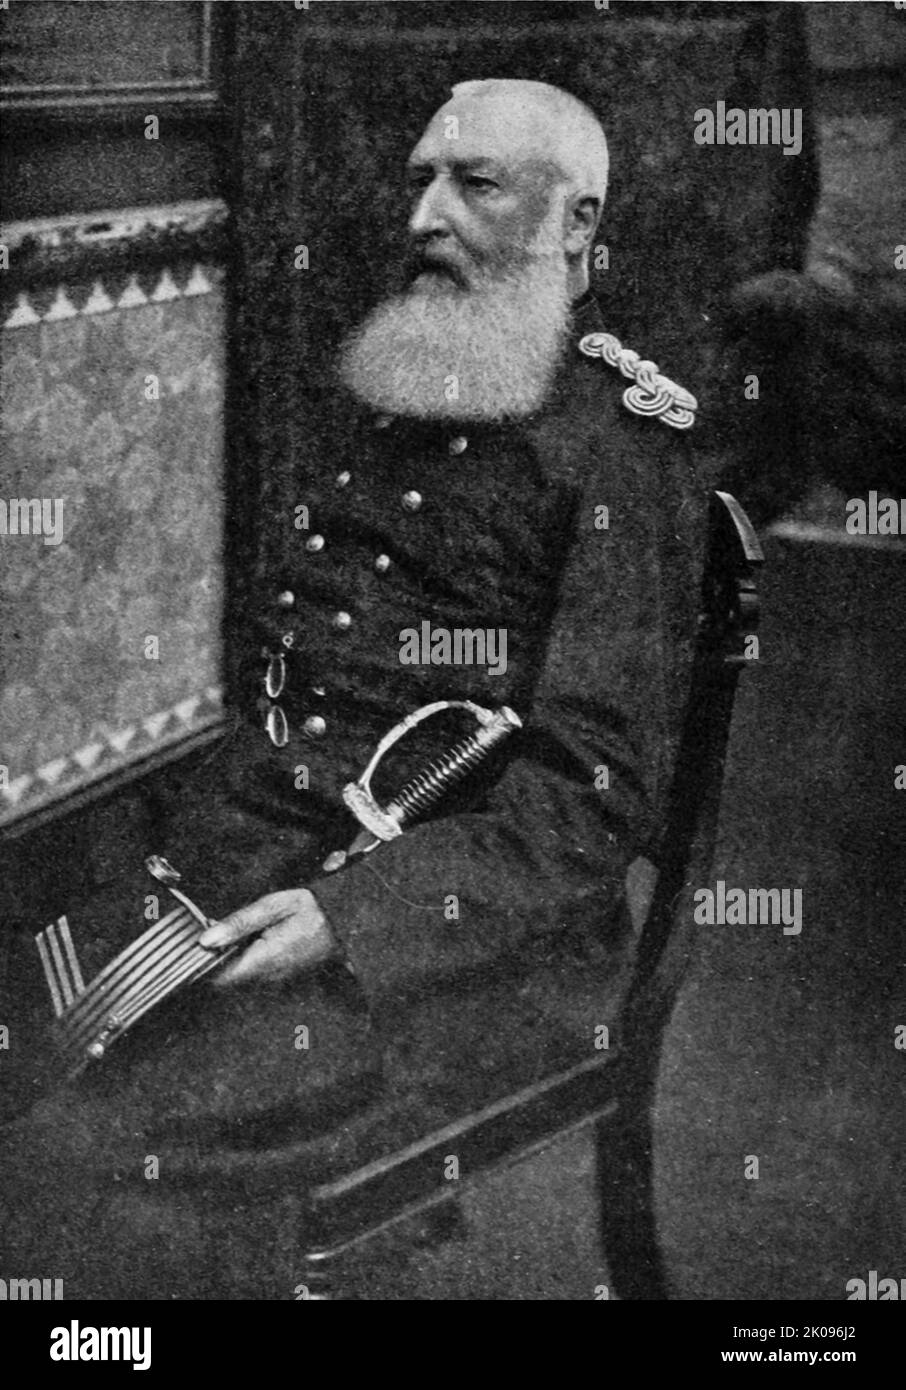 Leopold II (1835 - 1909) was the second King of the Belgians from 1865 to 1909 and, through his own efforts, the King-Sovereign of the Congo Free State from 1885 to 1908. Stock Photo